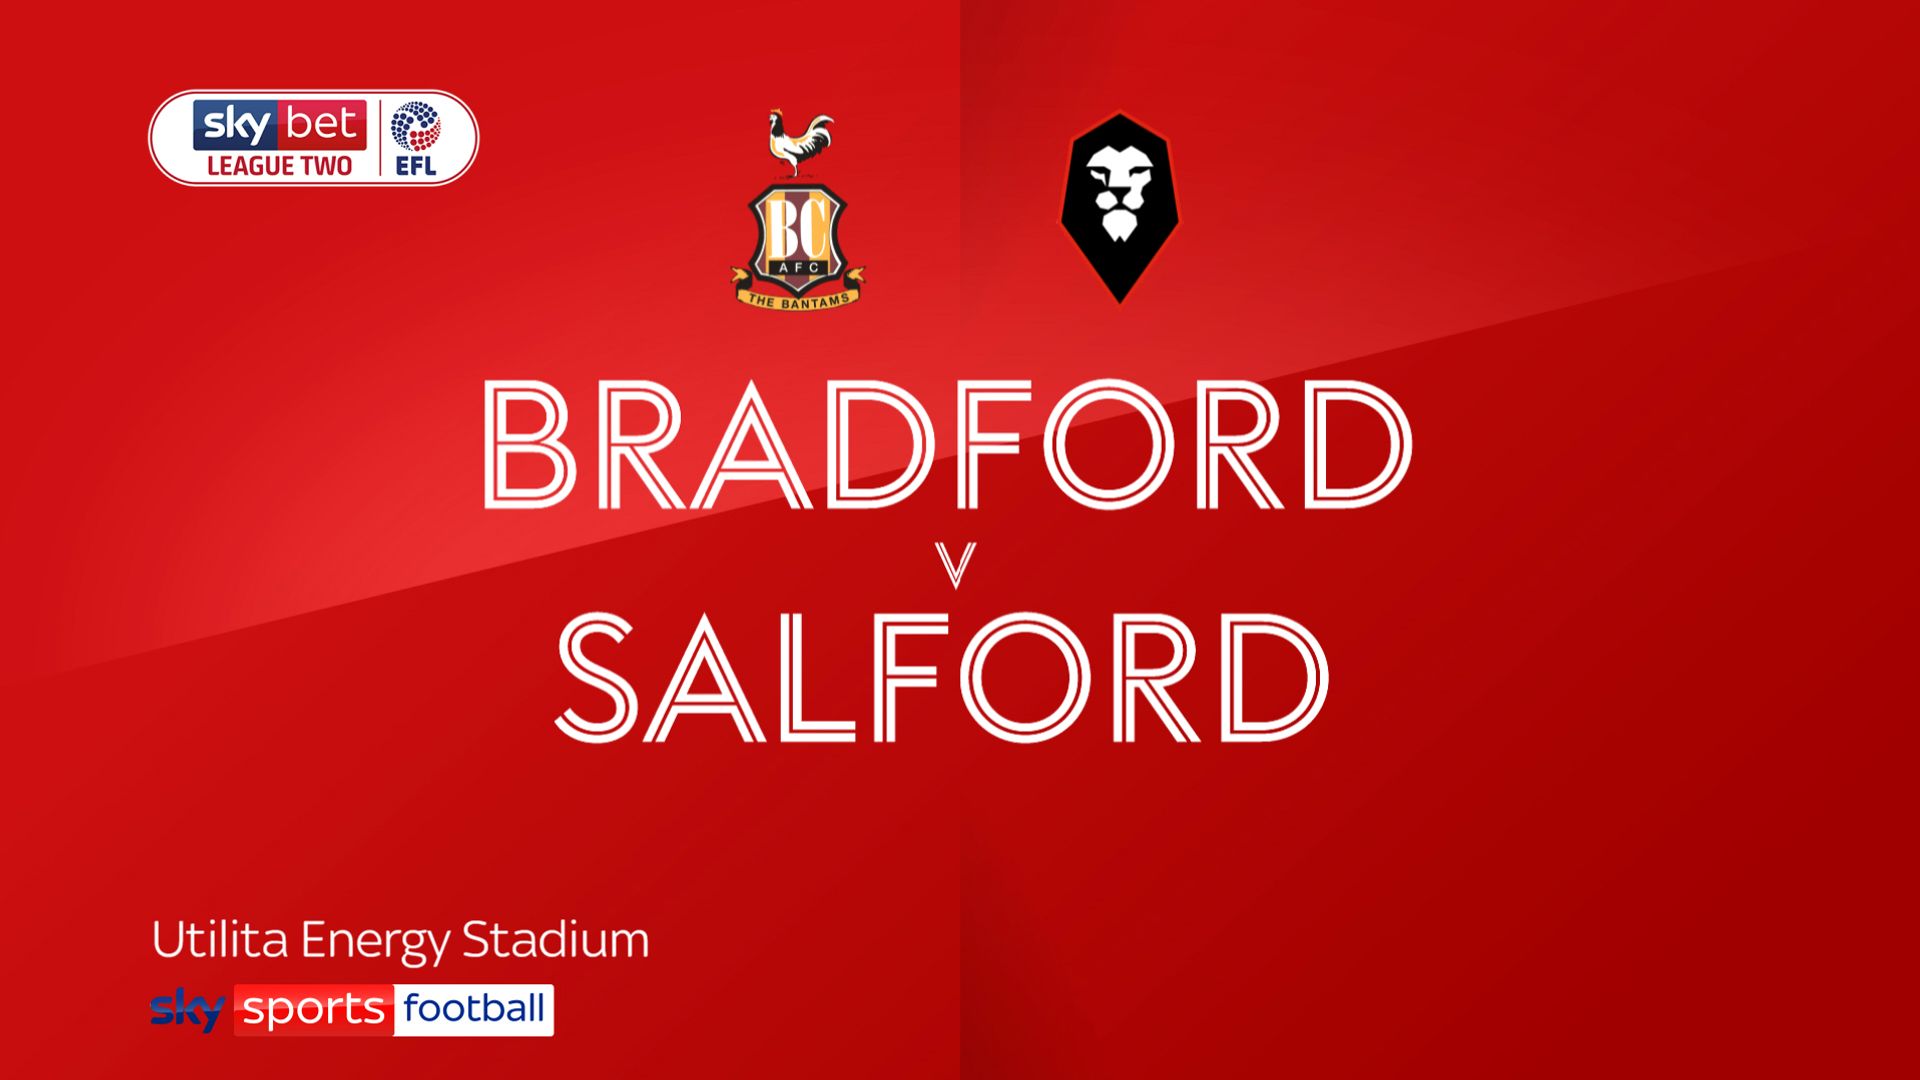 Bradford 2-1 Salford: Late Paudie O’Connor goal earns hosts win over 10-man Salford